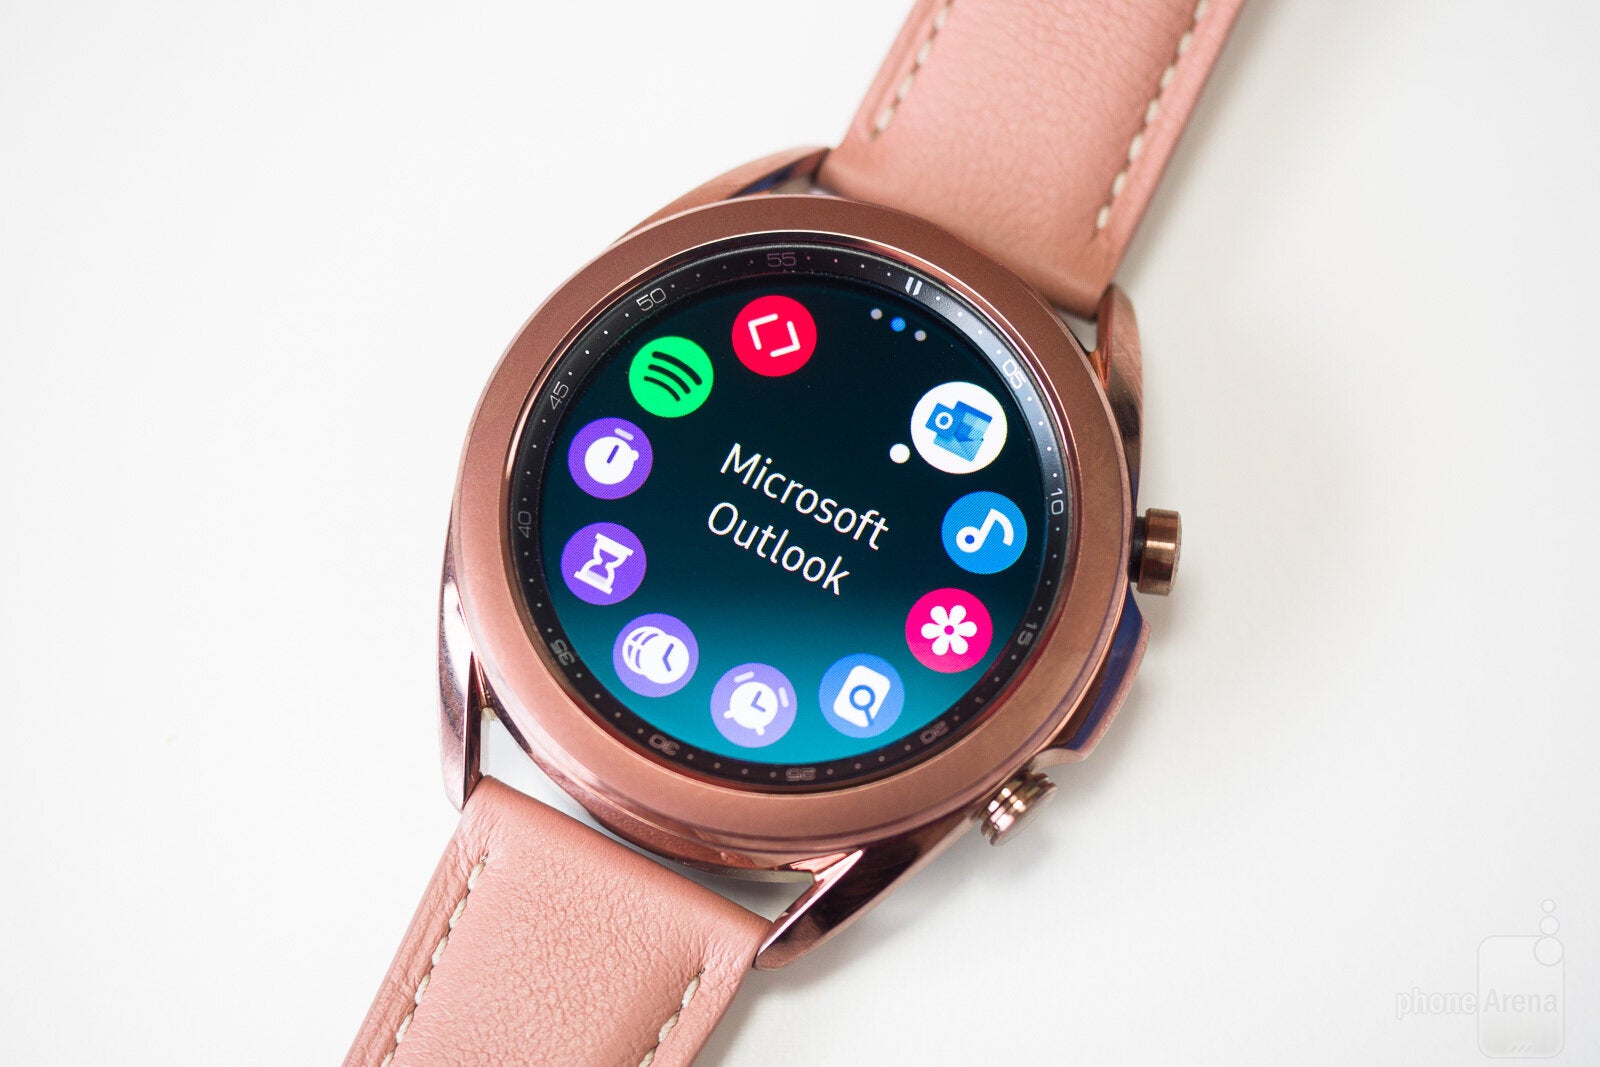 Apple and Samsung dominated the European wearables market in Q1